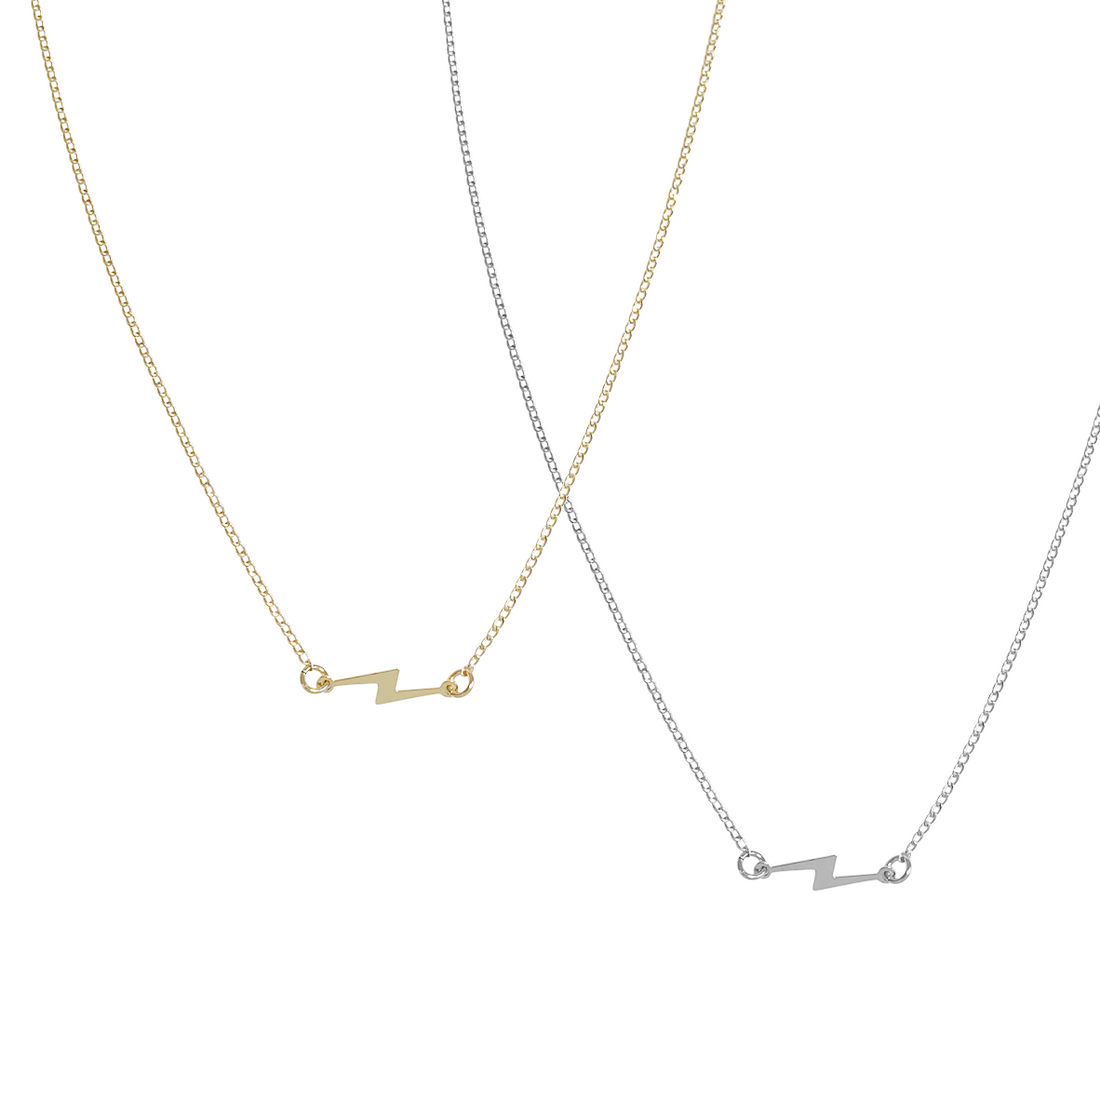 Pip Bolt Necklace in Gold & Silver Colors